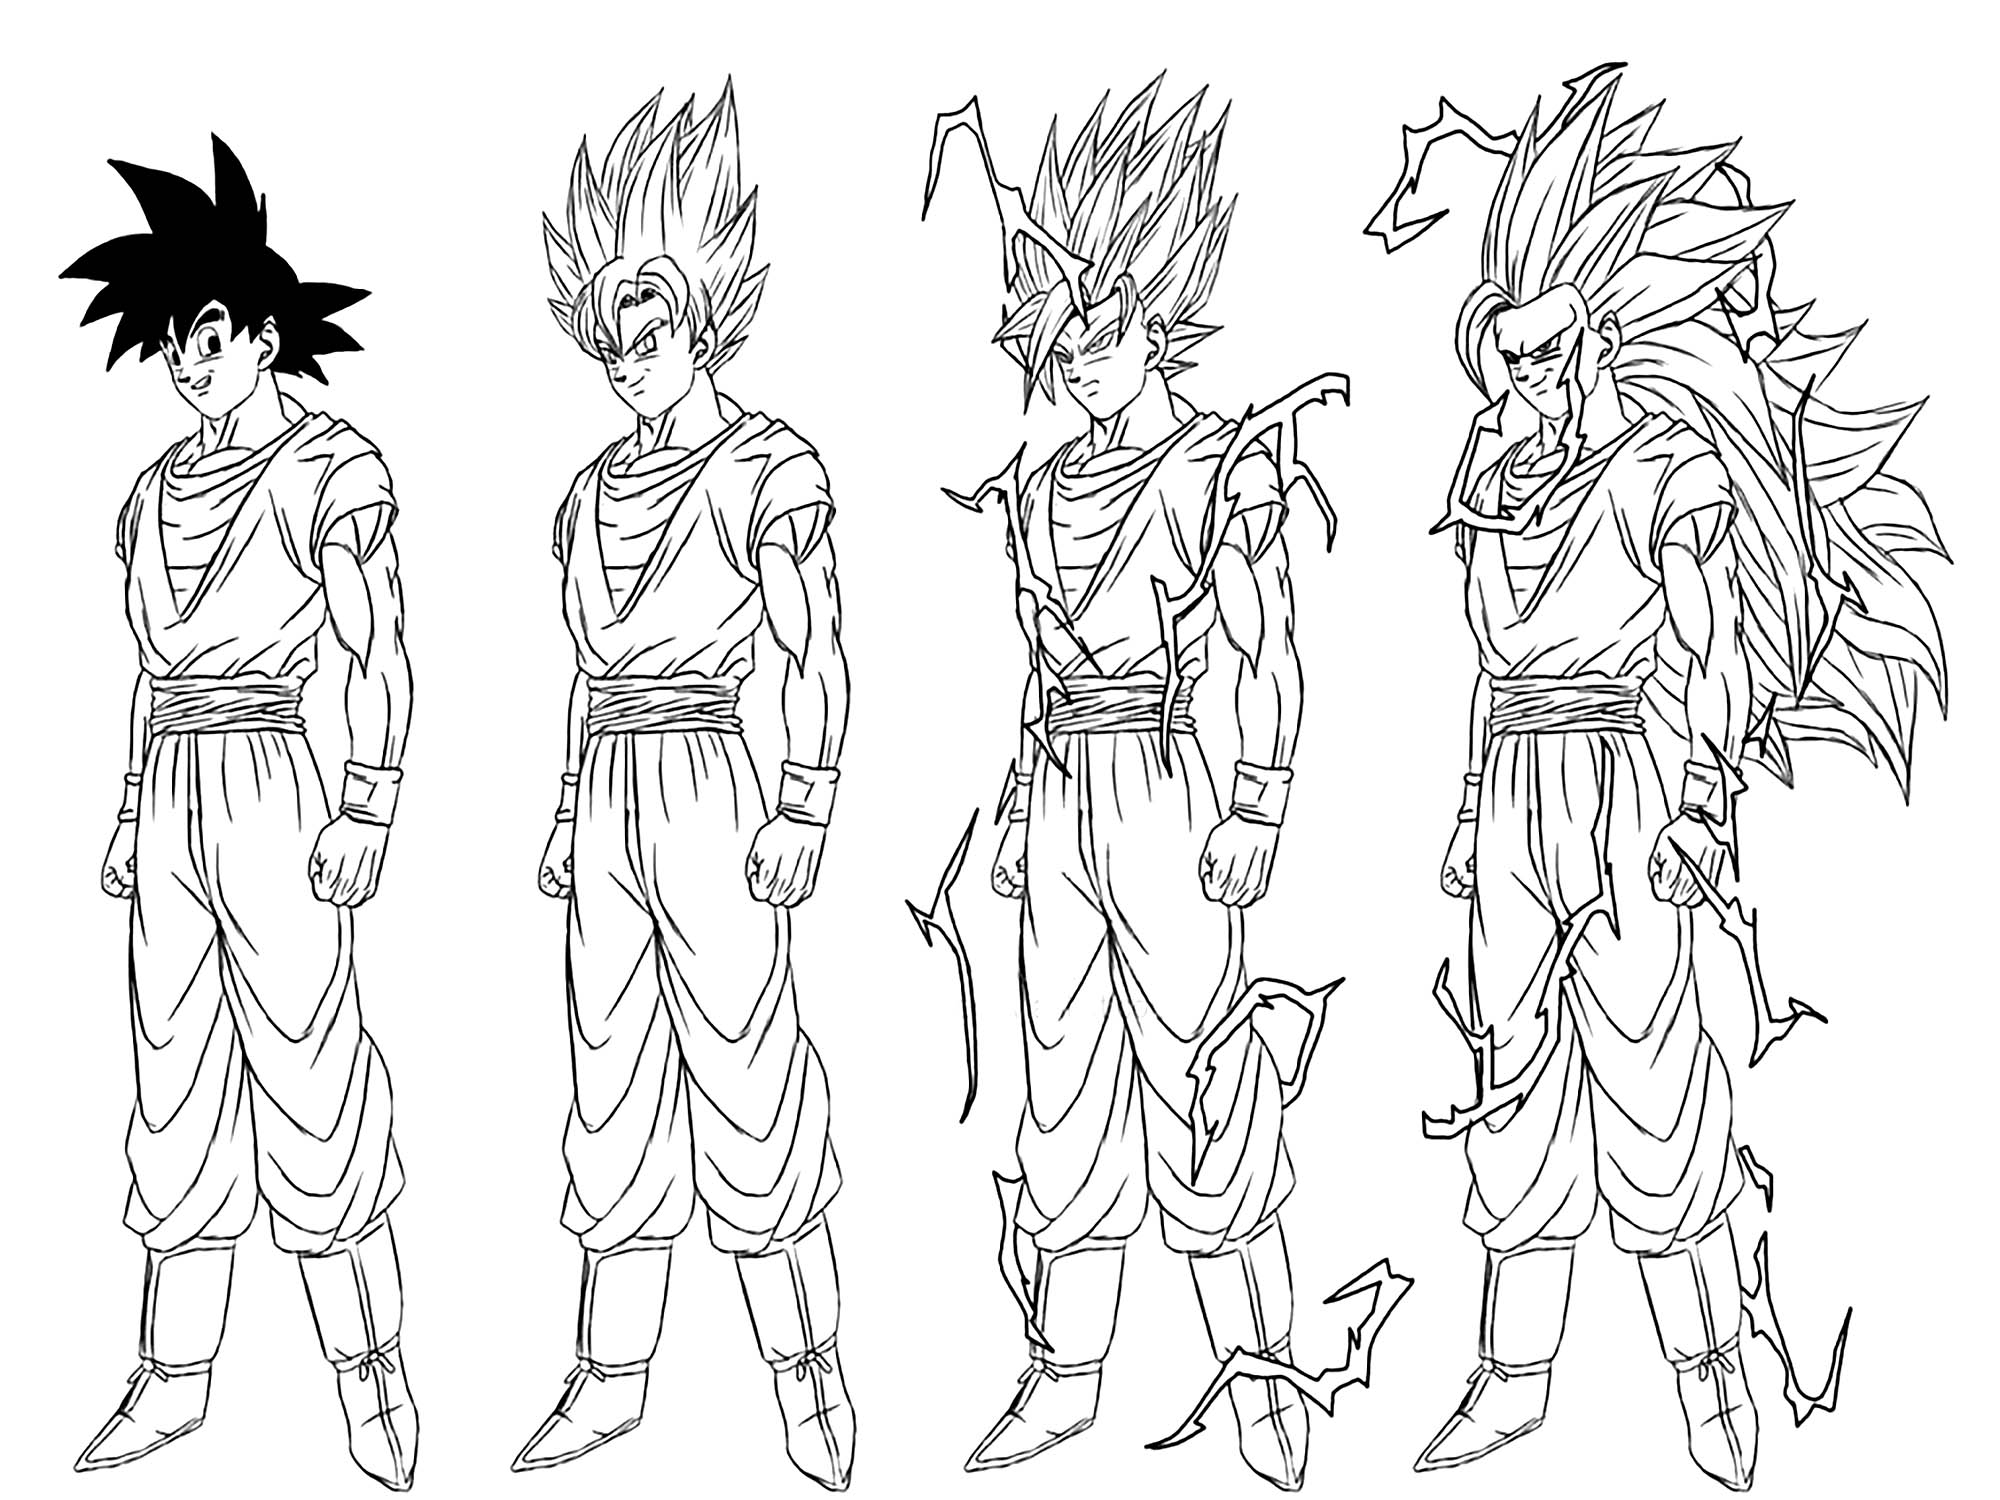 Printable Transformation from Songoku Coloring Page for kids.